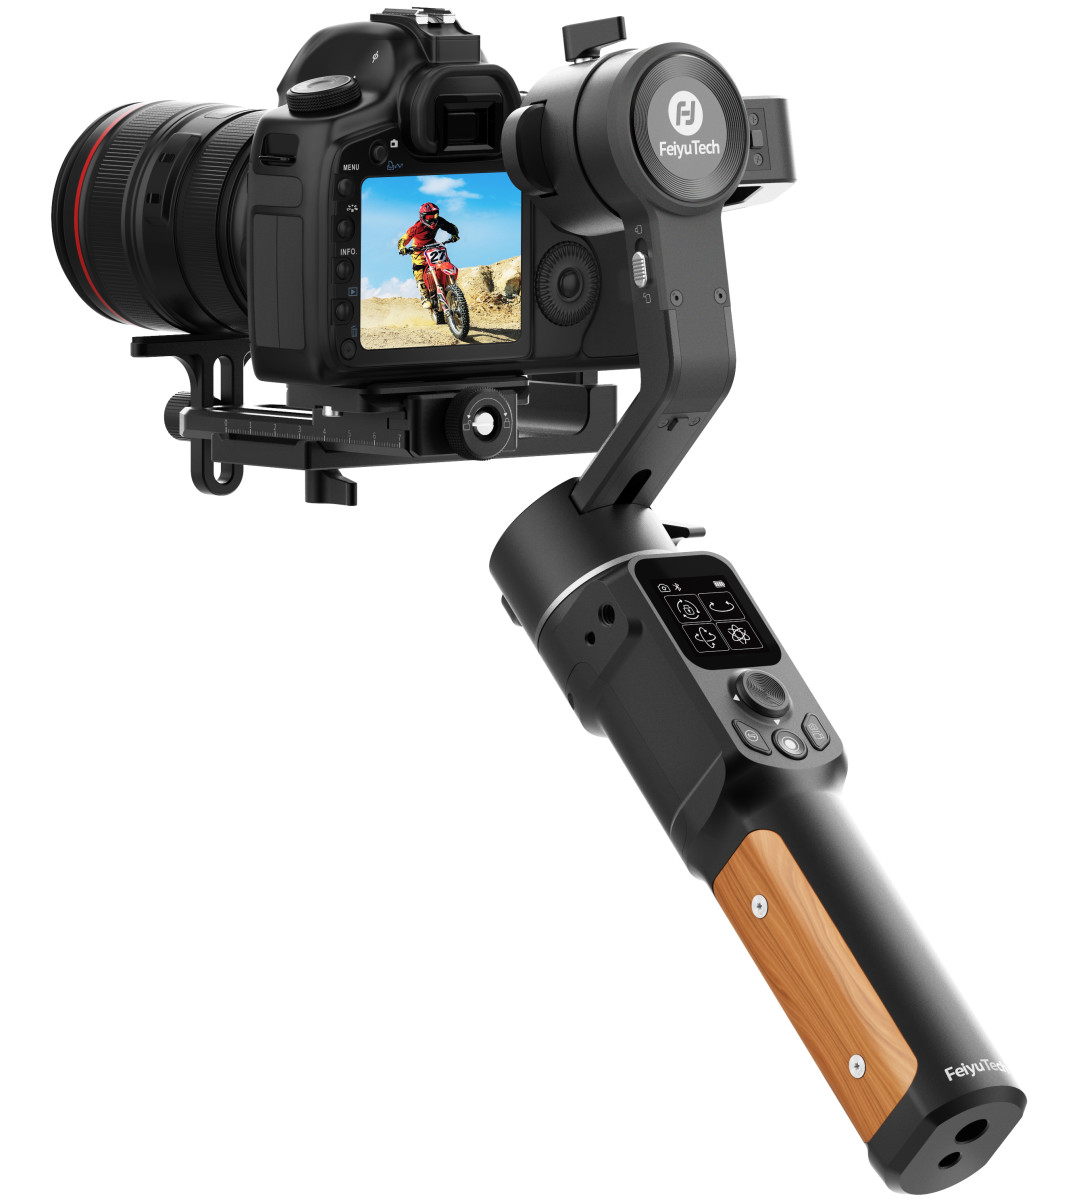 feiyutechs-ak2000c-is-a-low-cost-professional-gimbal-for-digital-cameras